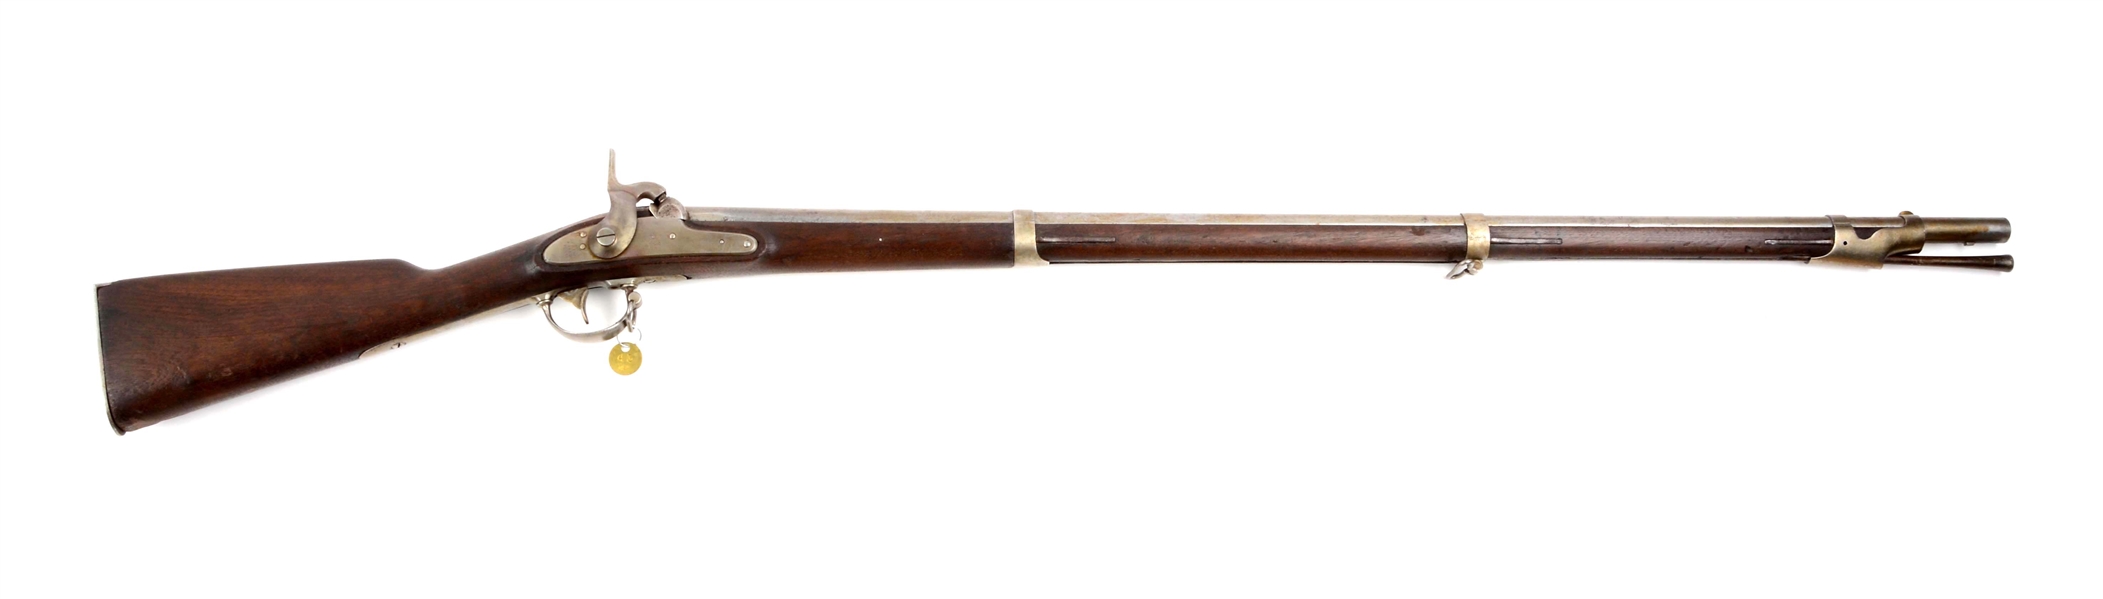 (A) U.S. MODEL 1842 SPRINGFIELD MUSKET MARKED "NEW HAMPSHIRE". 